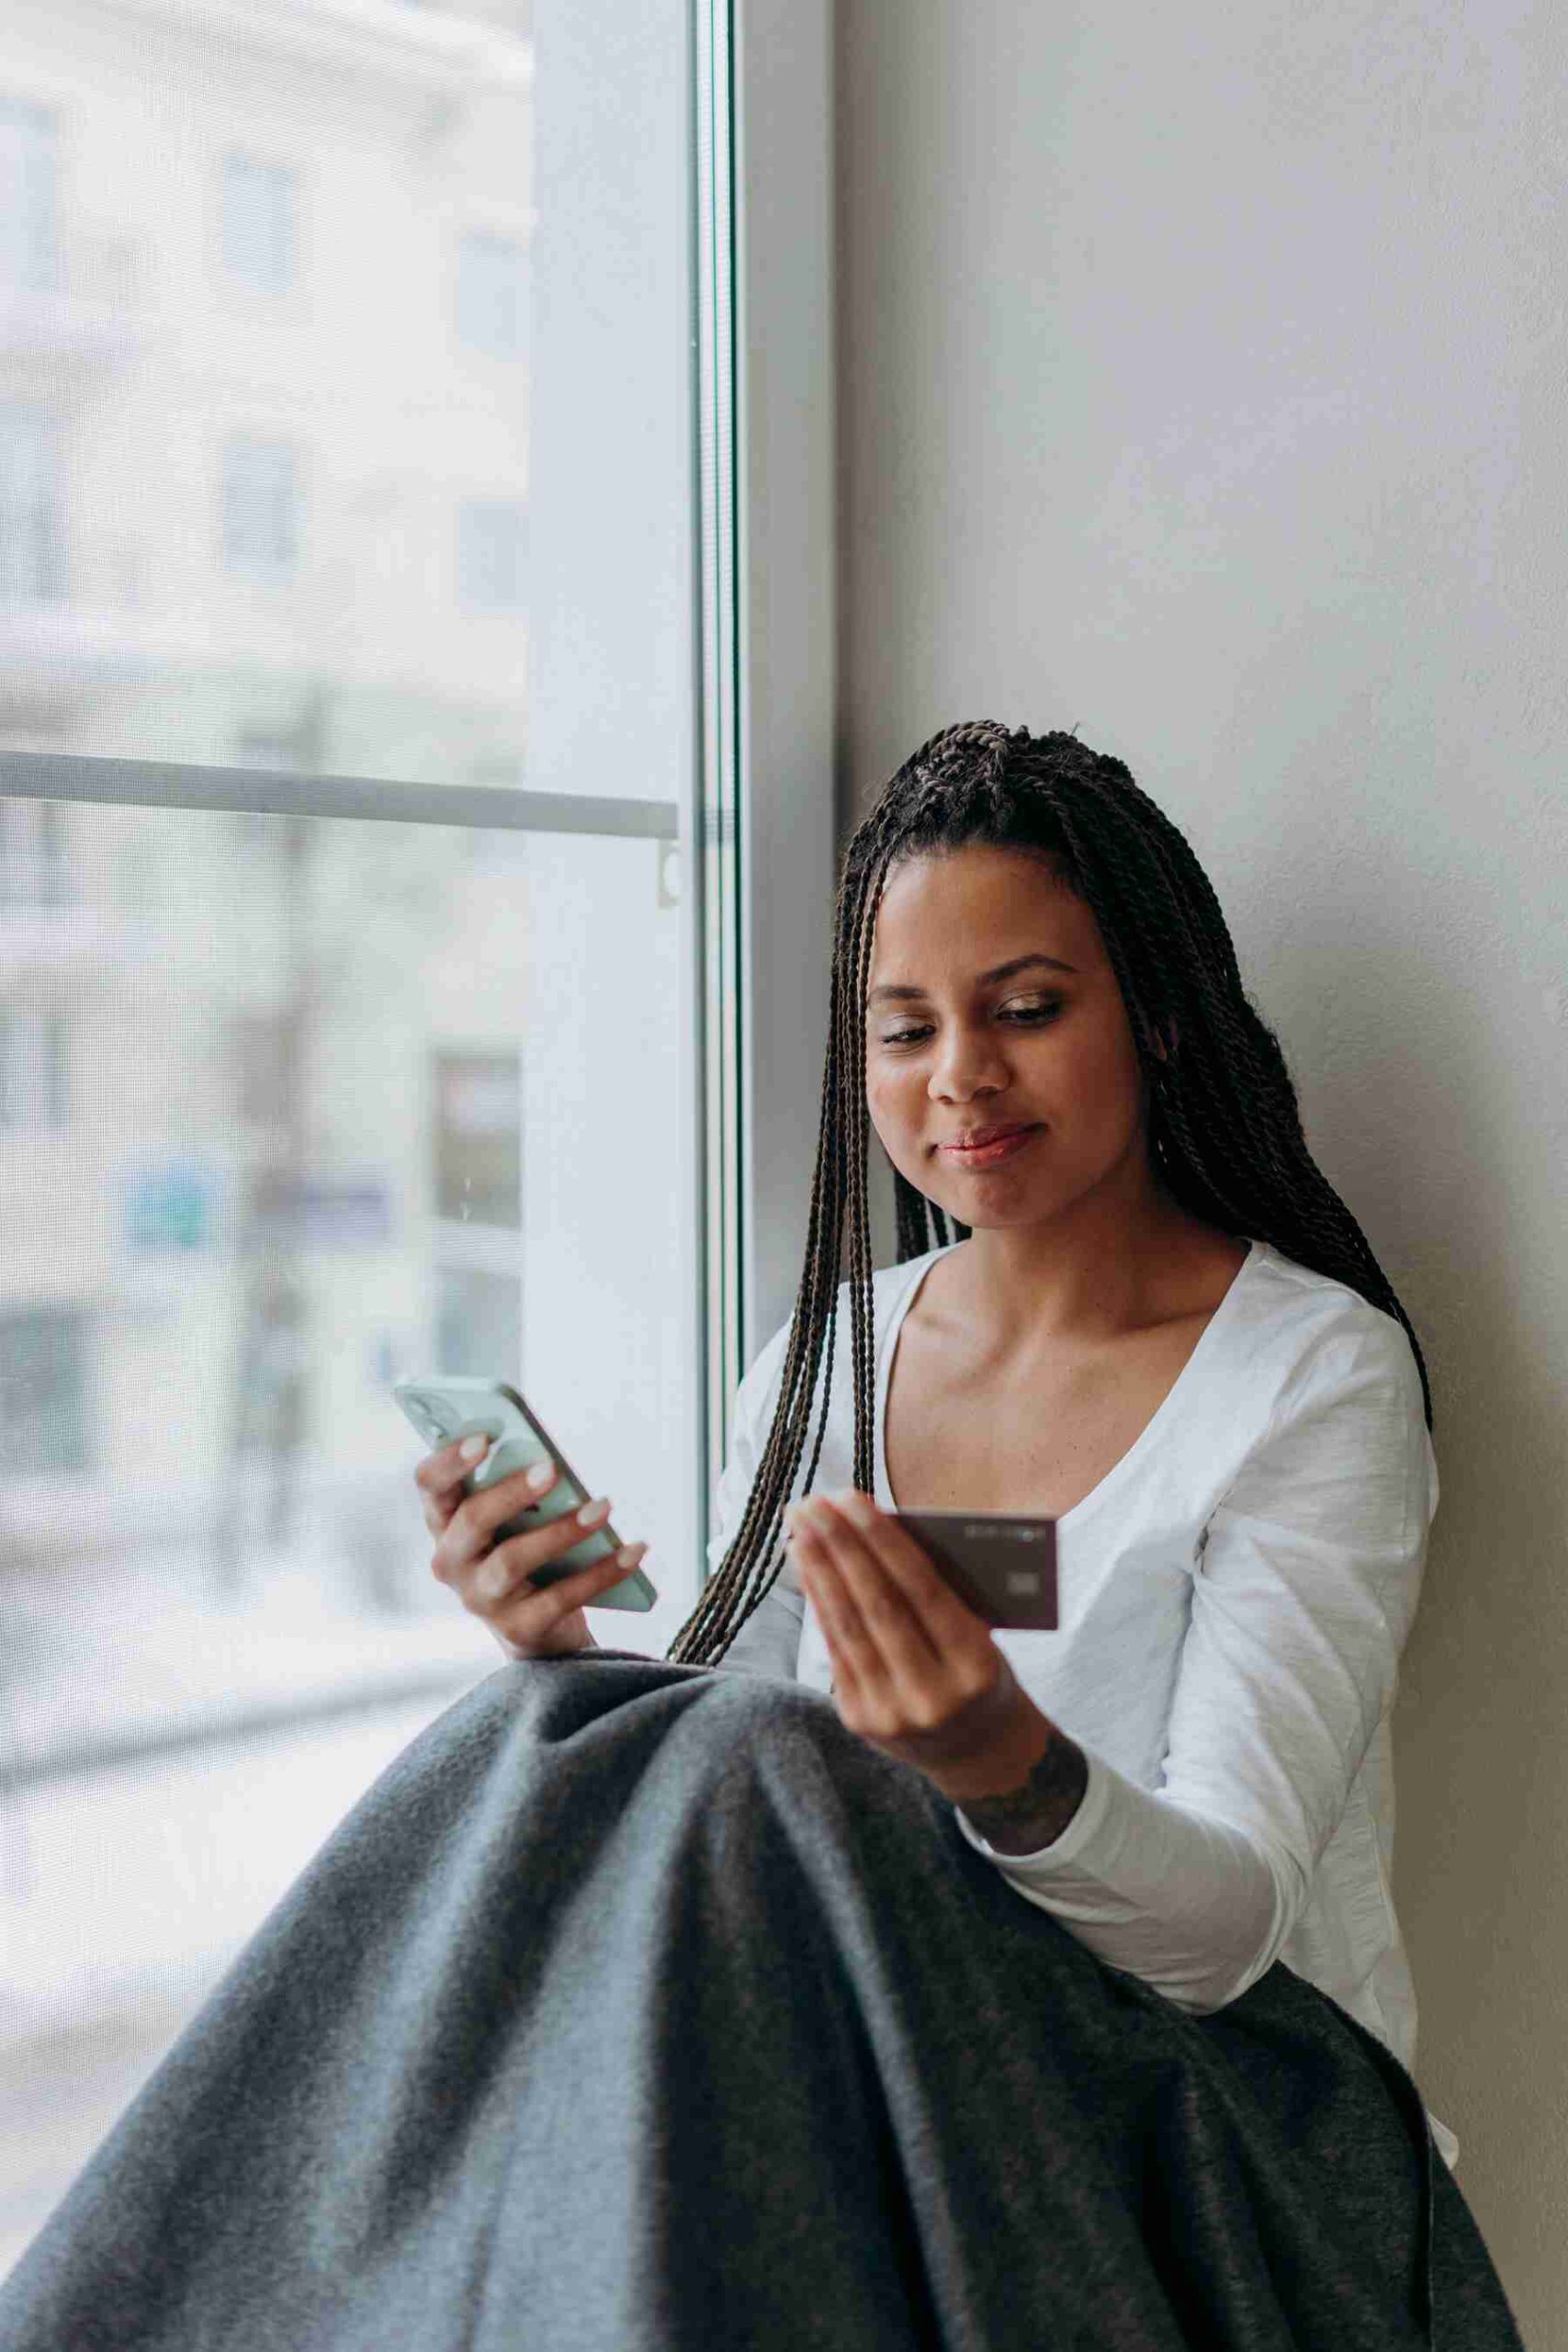 A woman sitting by the window smiling while holding her phone and credit card